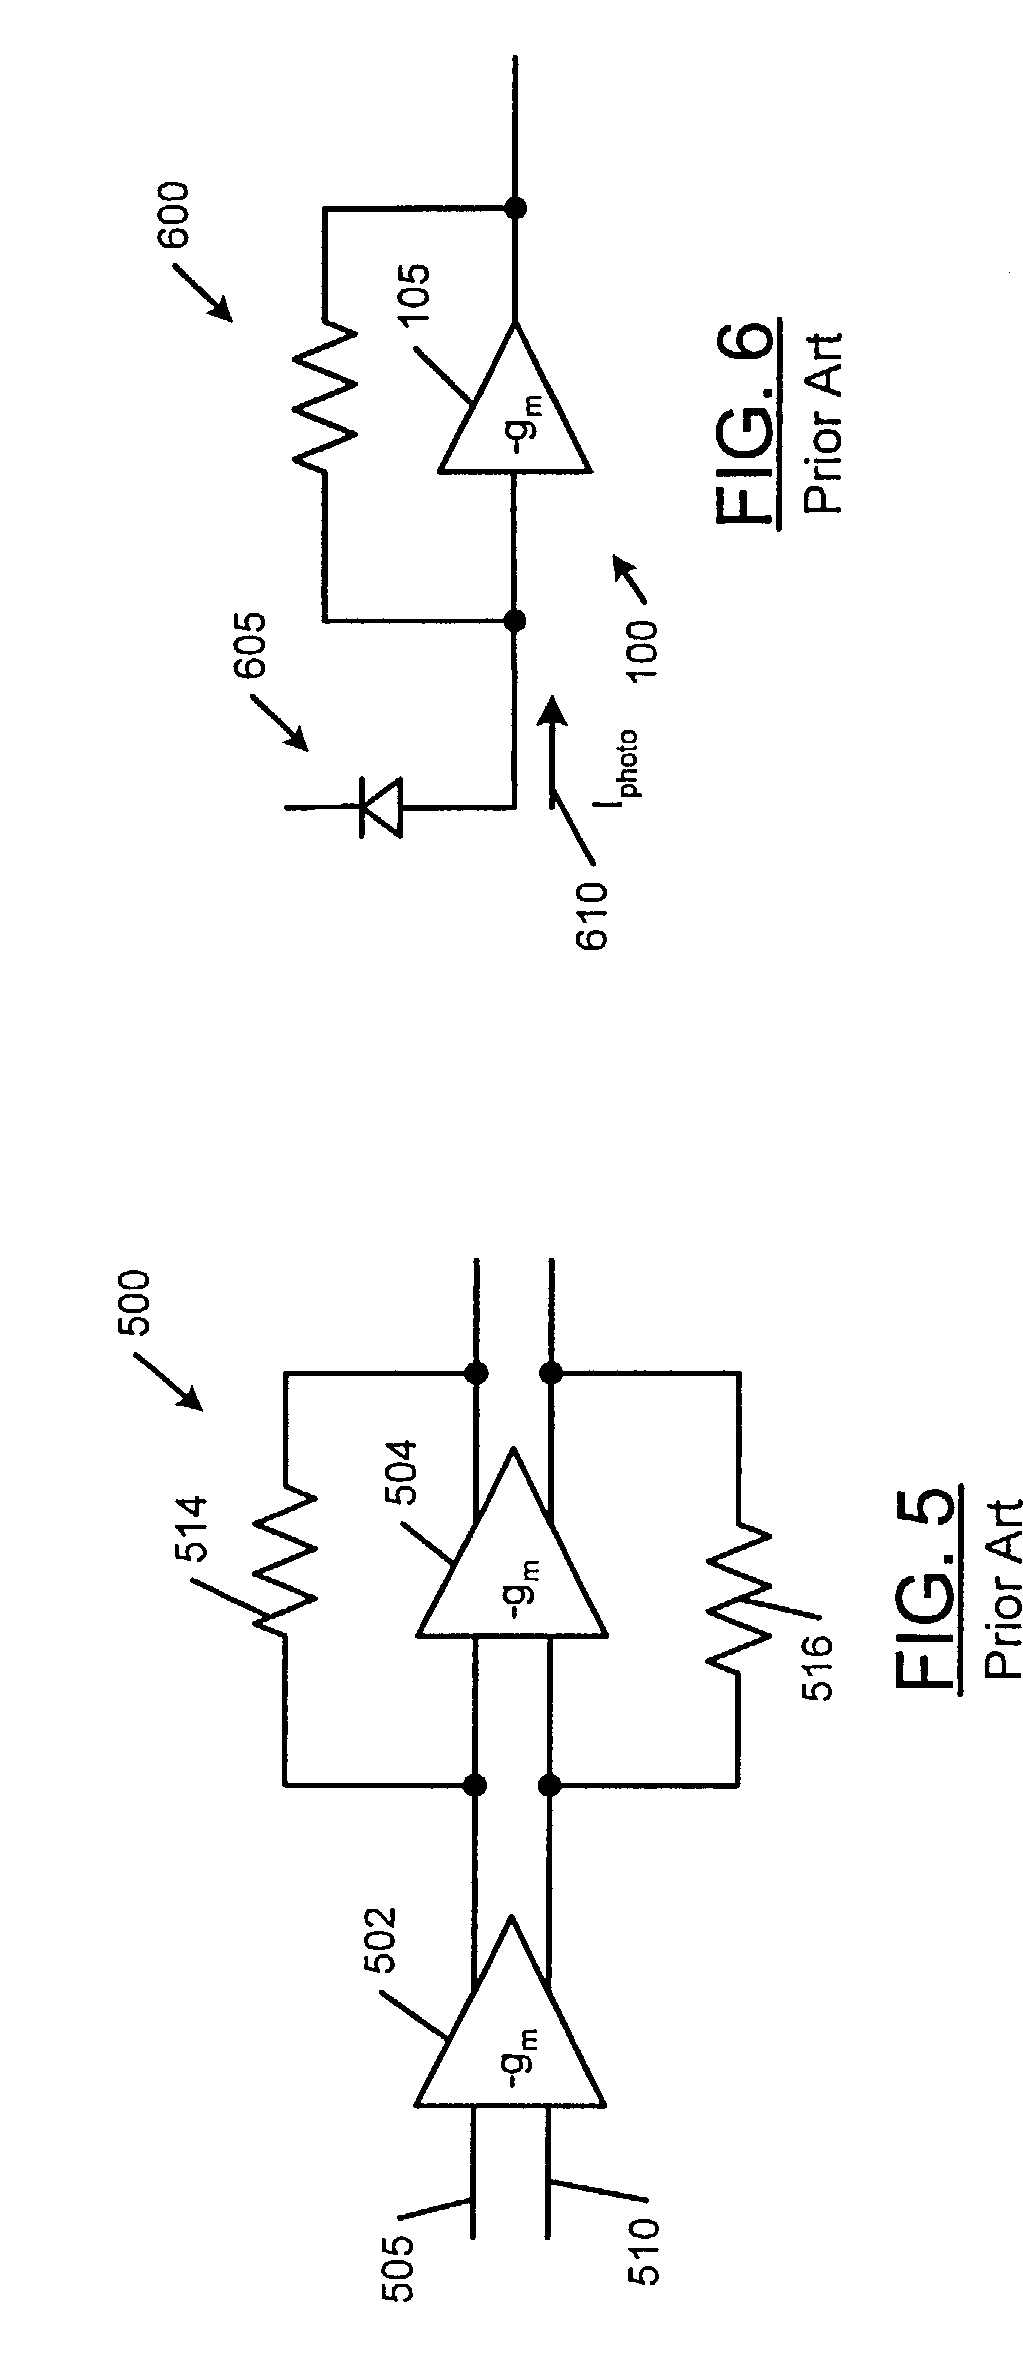 Nested transimpedance amplifier